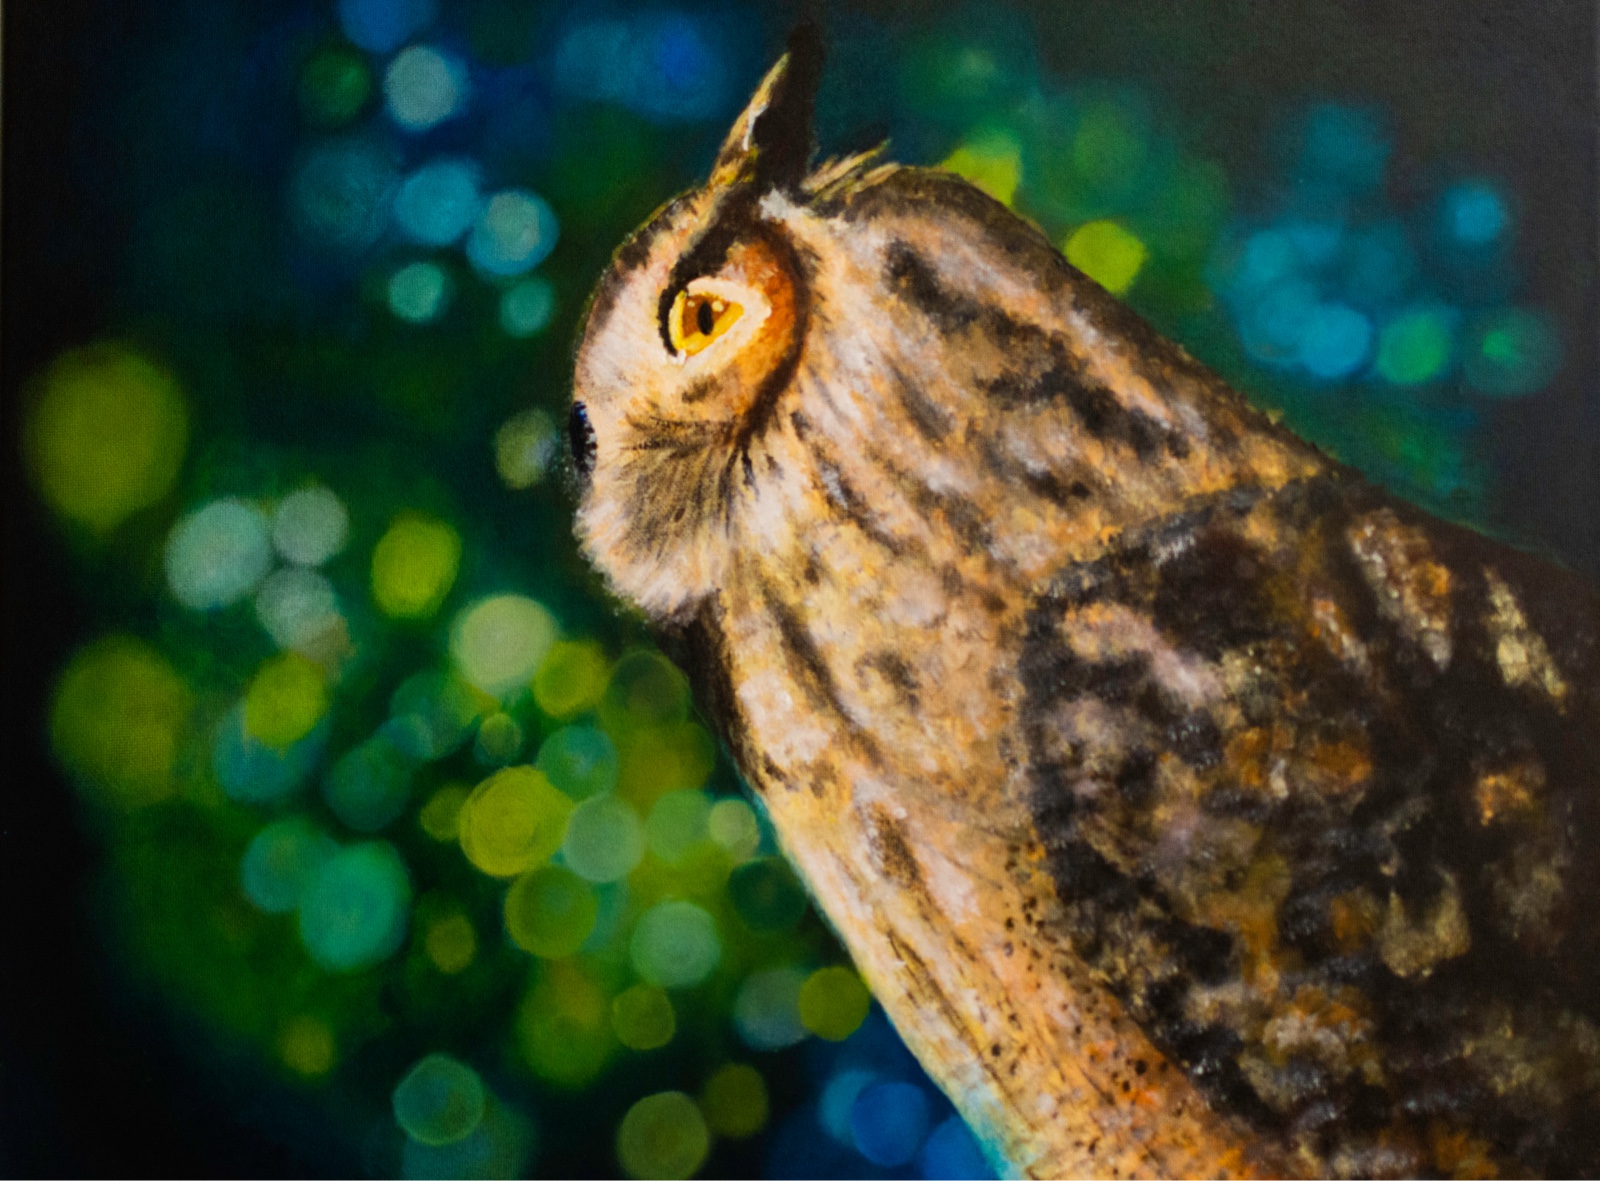 Acrylic painting of an owl by Michelle Pakron